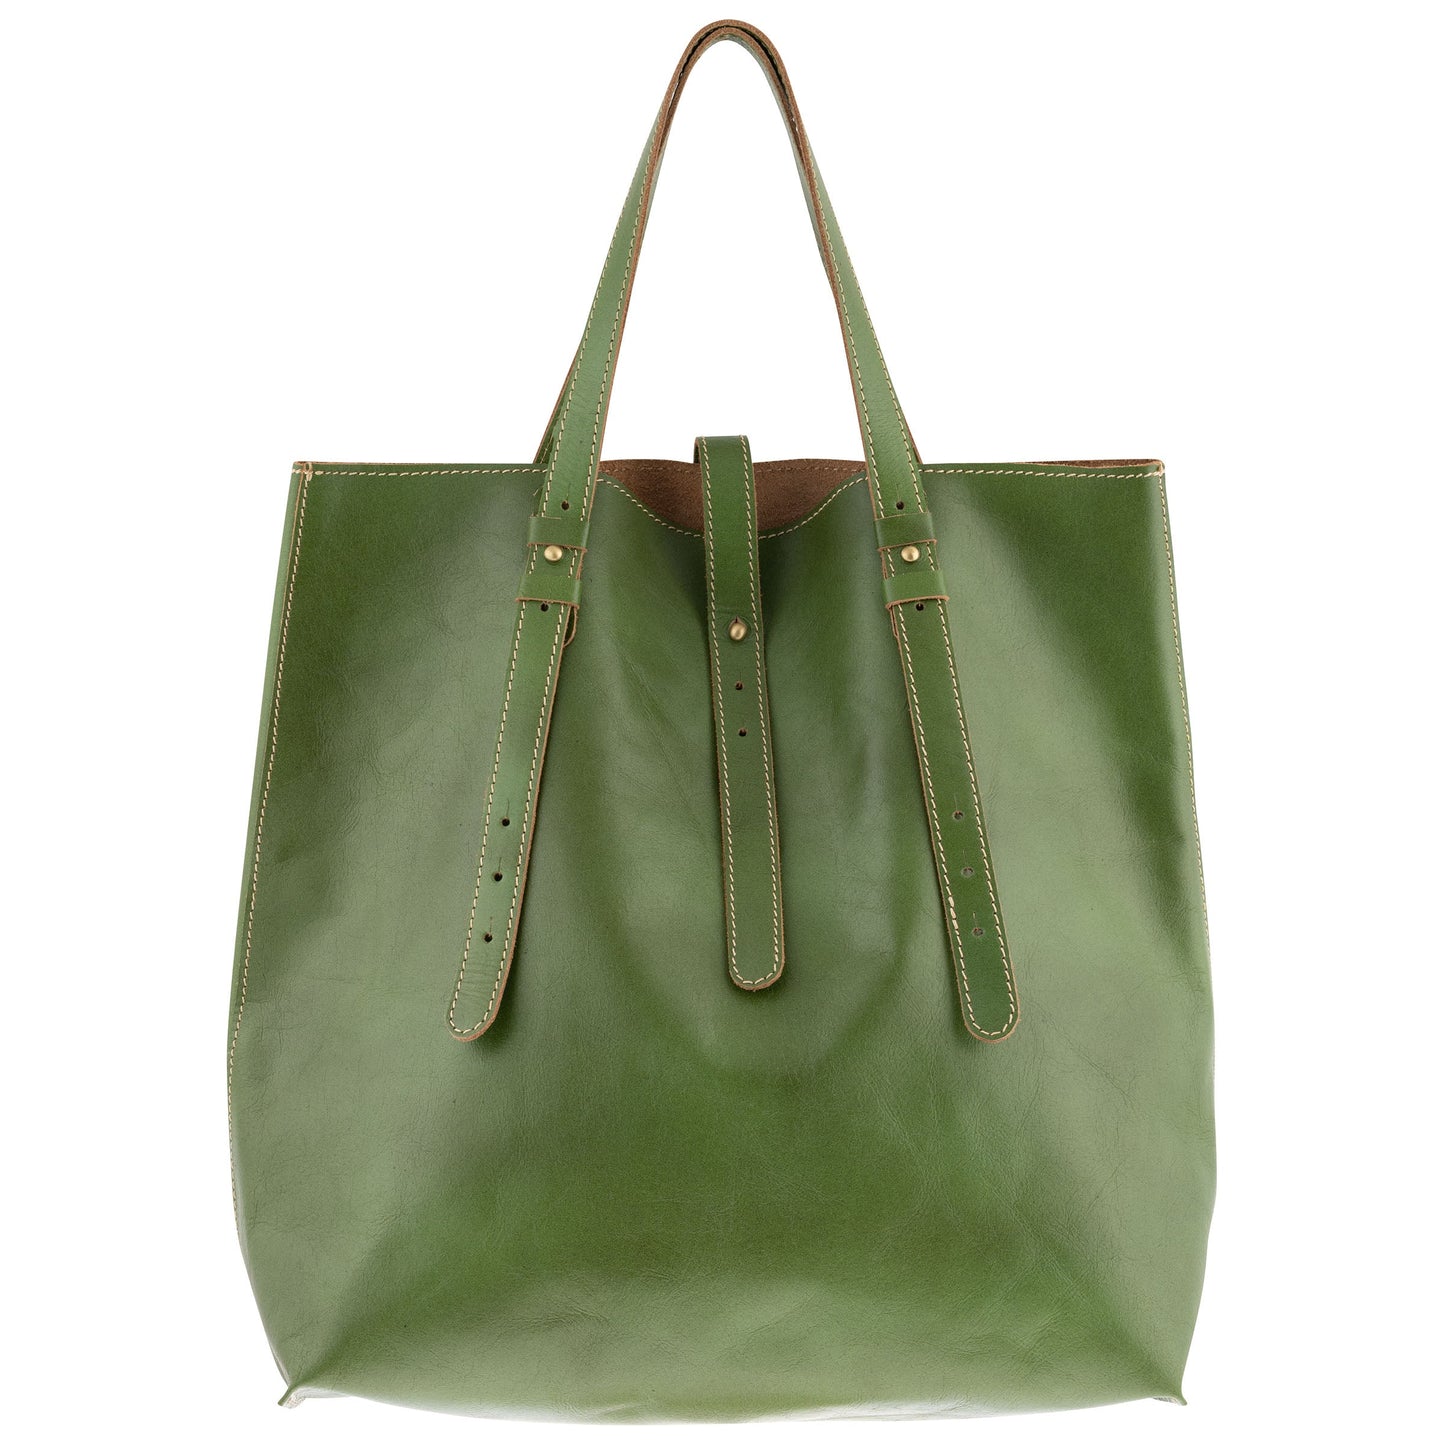 green leather tote on a white background.